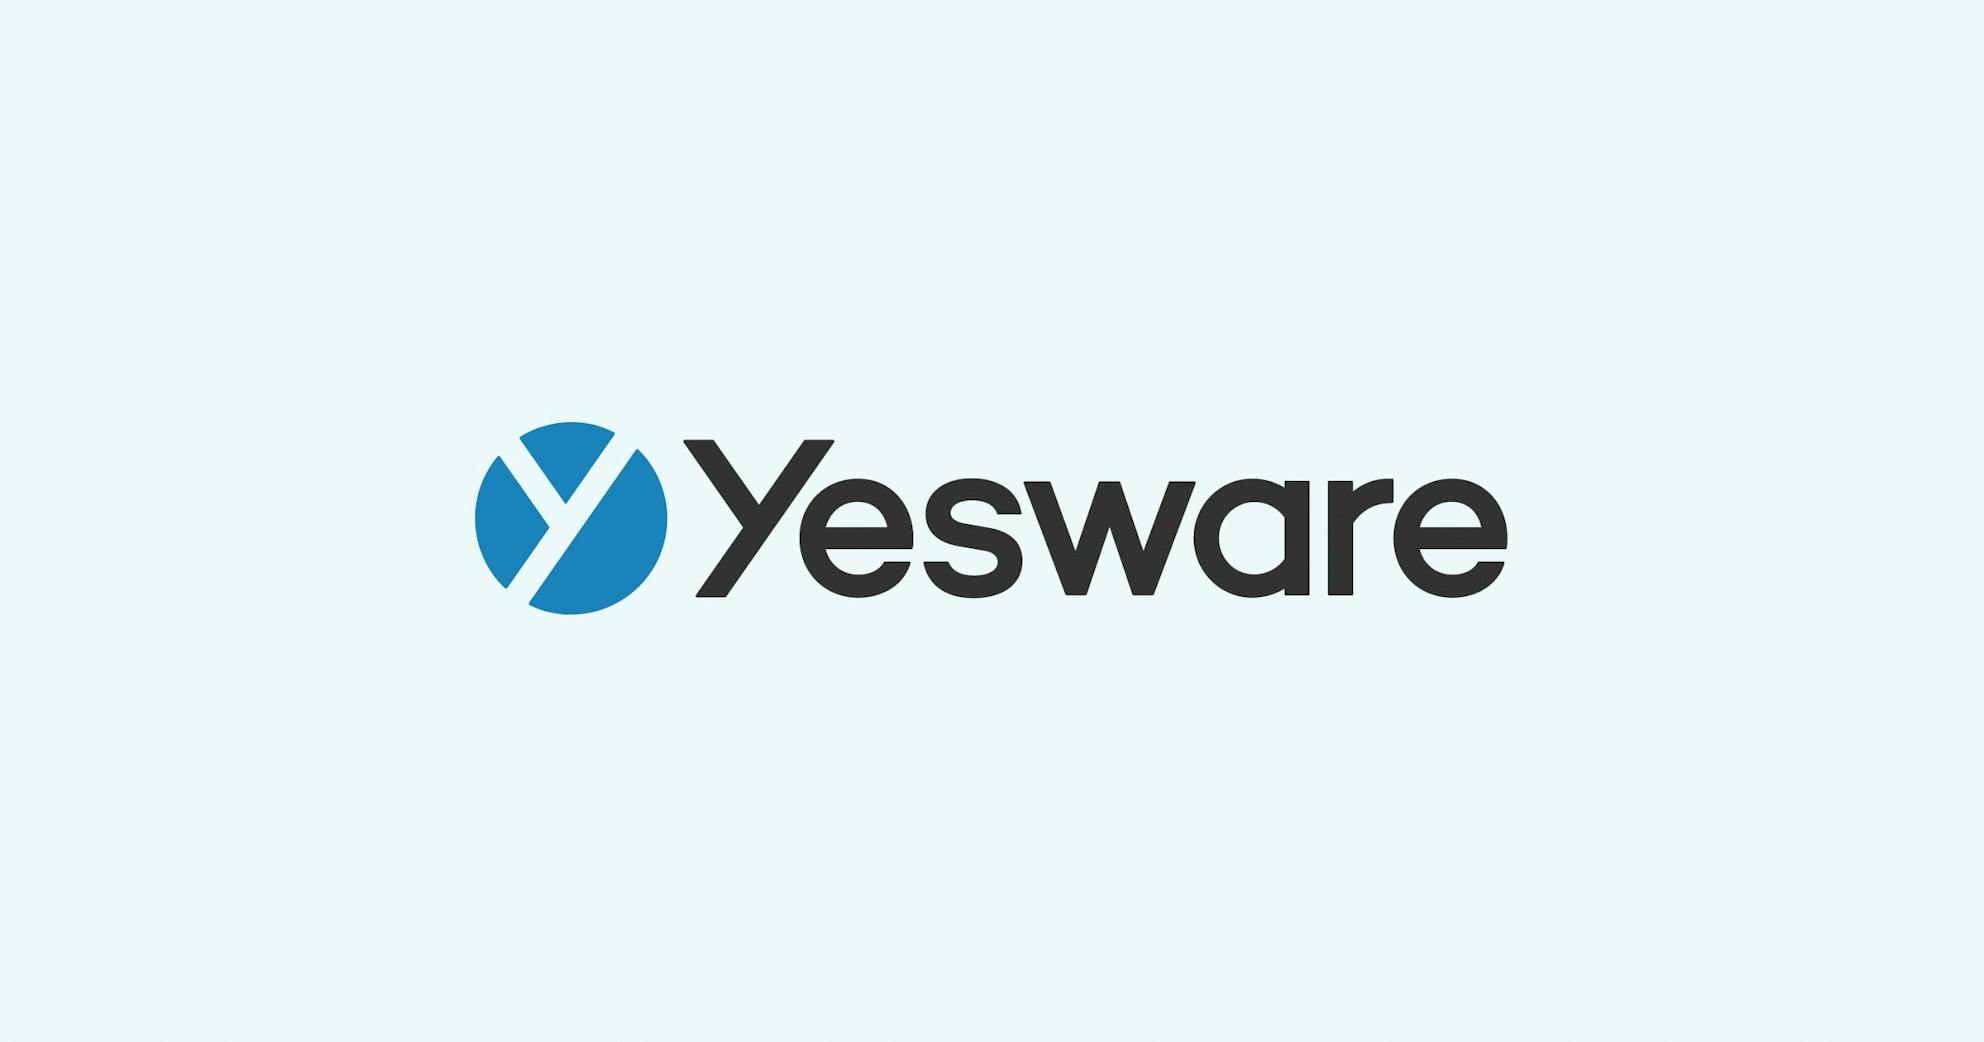 Getting the most out of Yesware templates